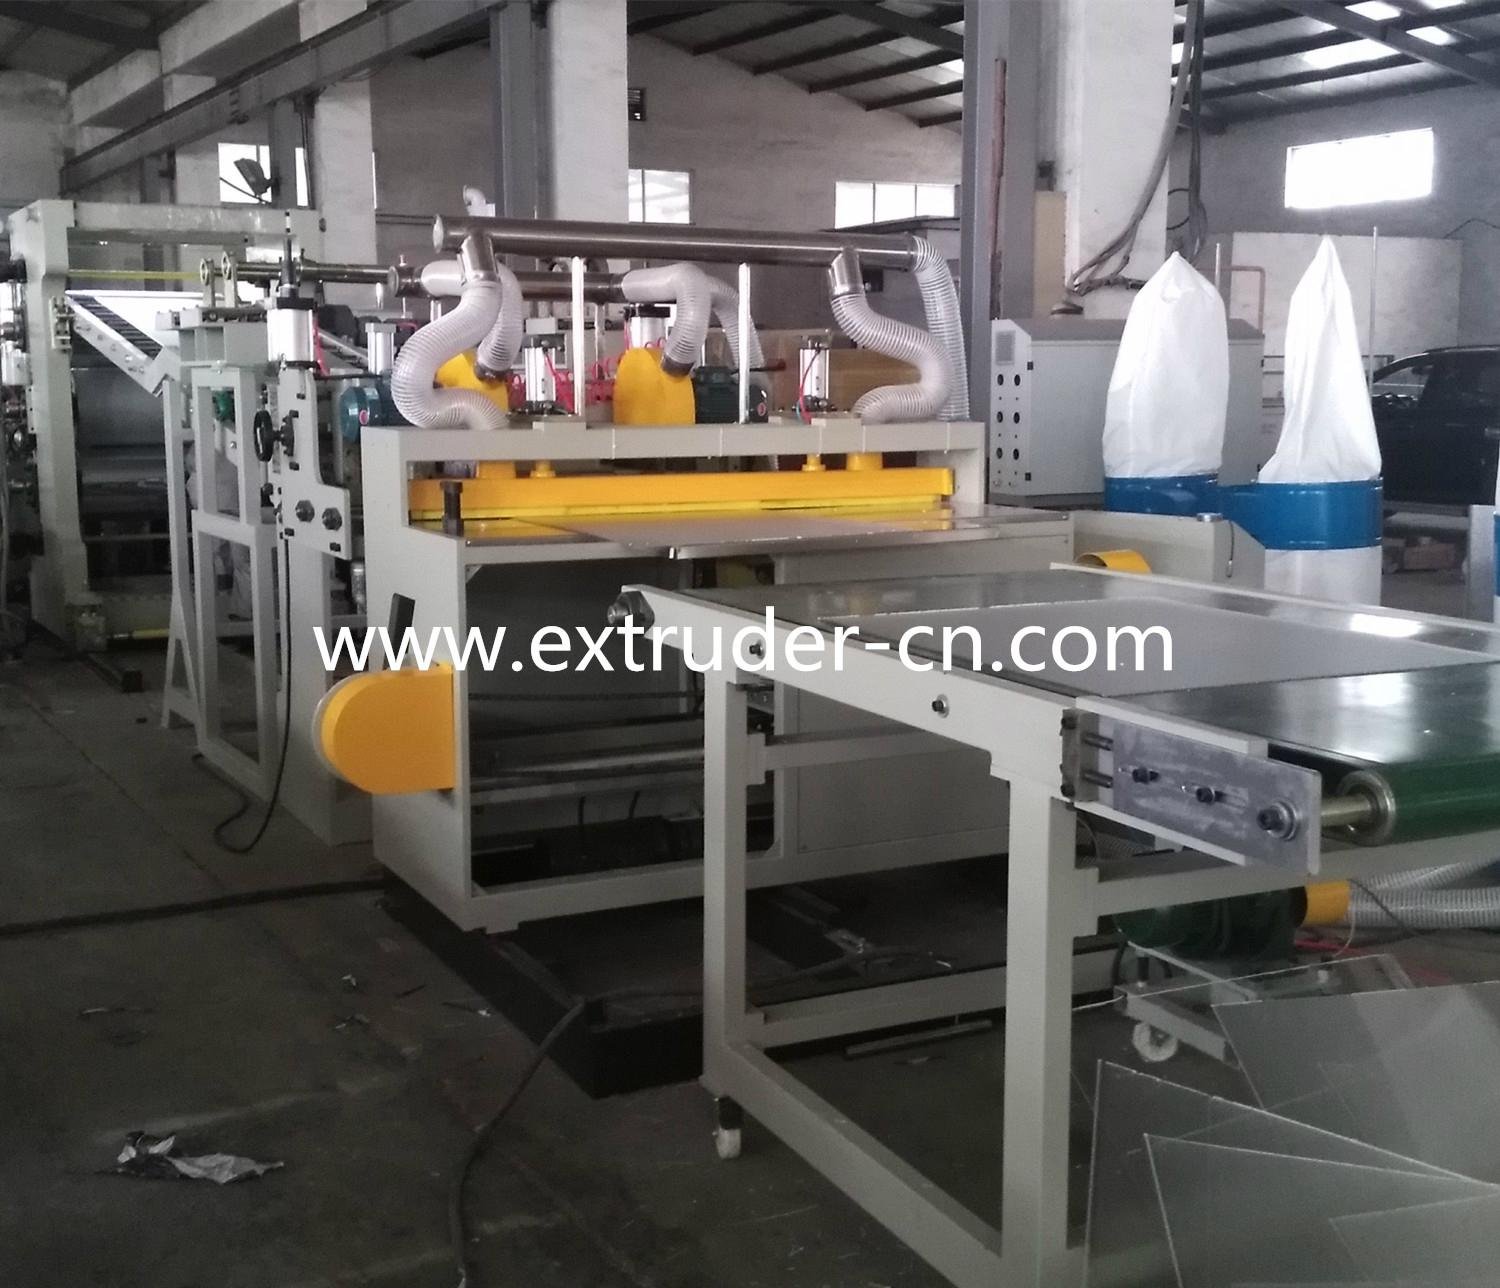 ABS PMMA sanitary board extrusion line